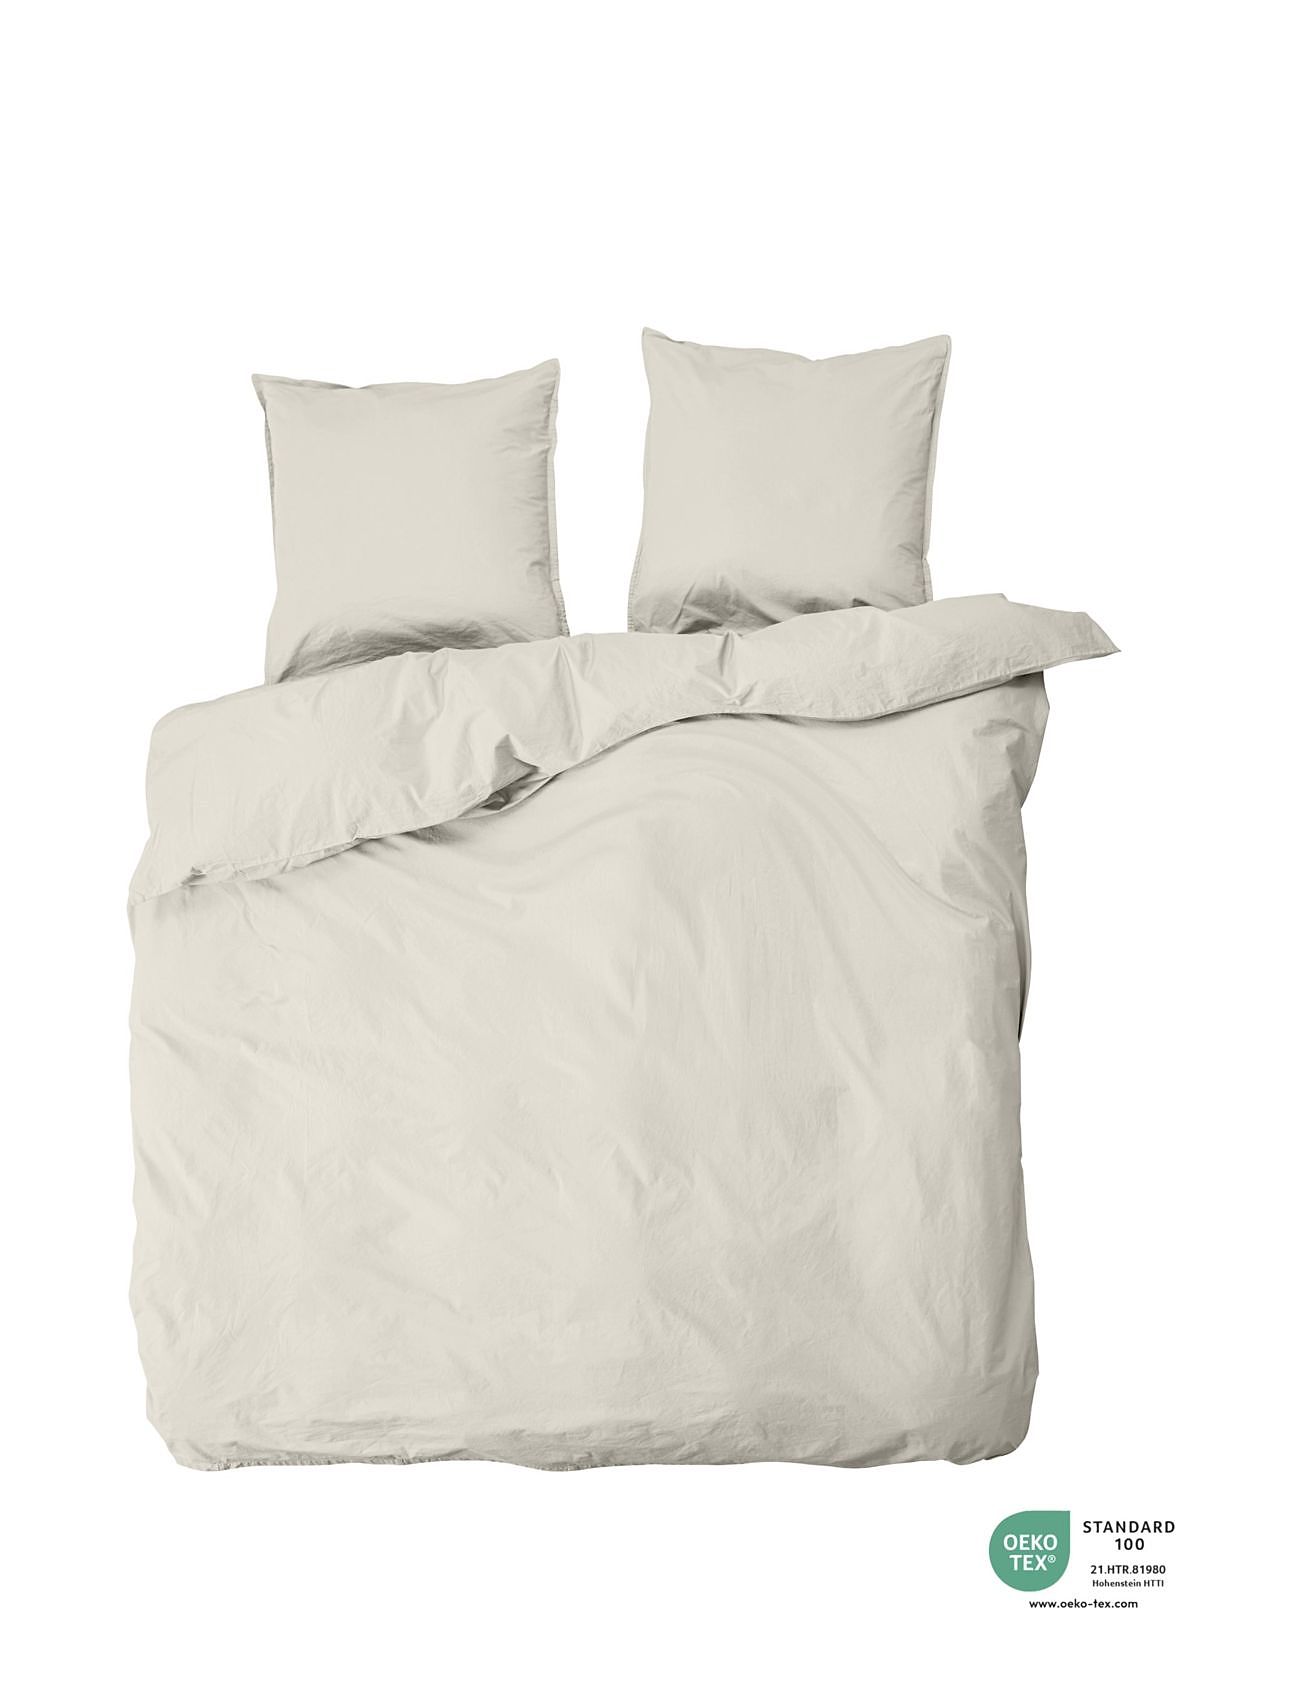 "by NORD" "Double Bed Linen, Ingrid, Shell Home Textiles Bedtextiles Sets Cream By